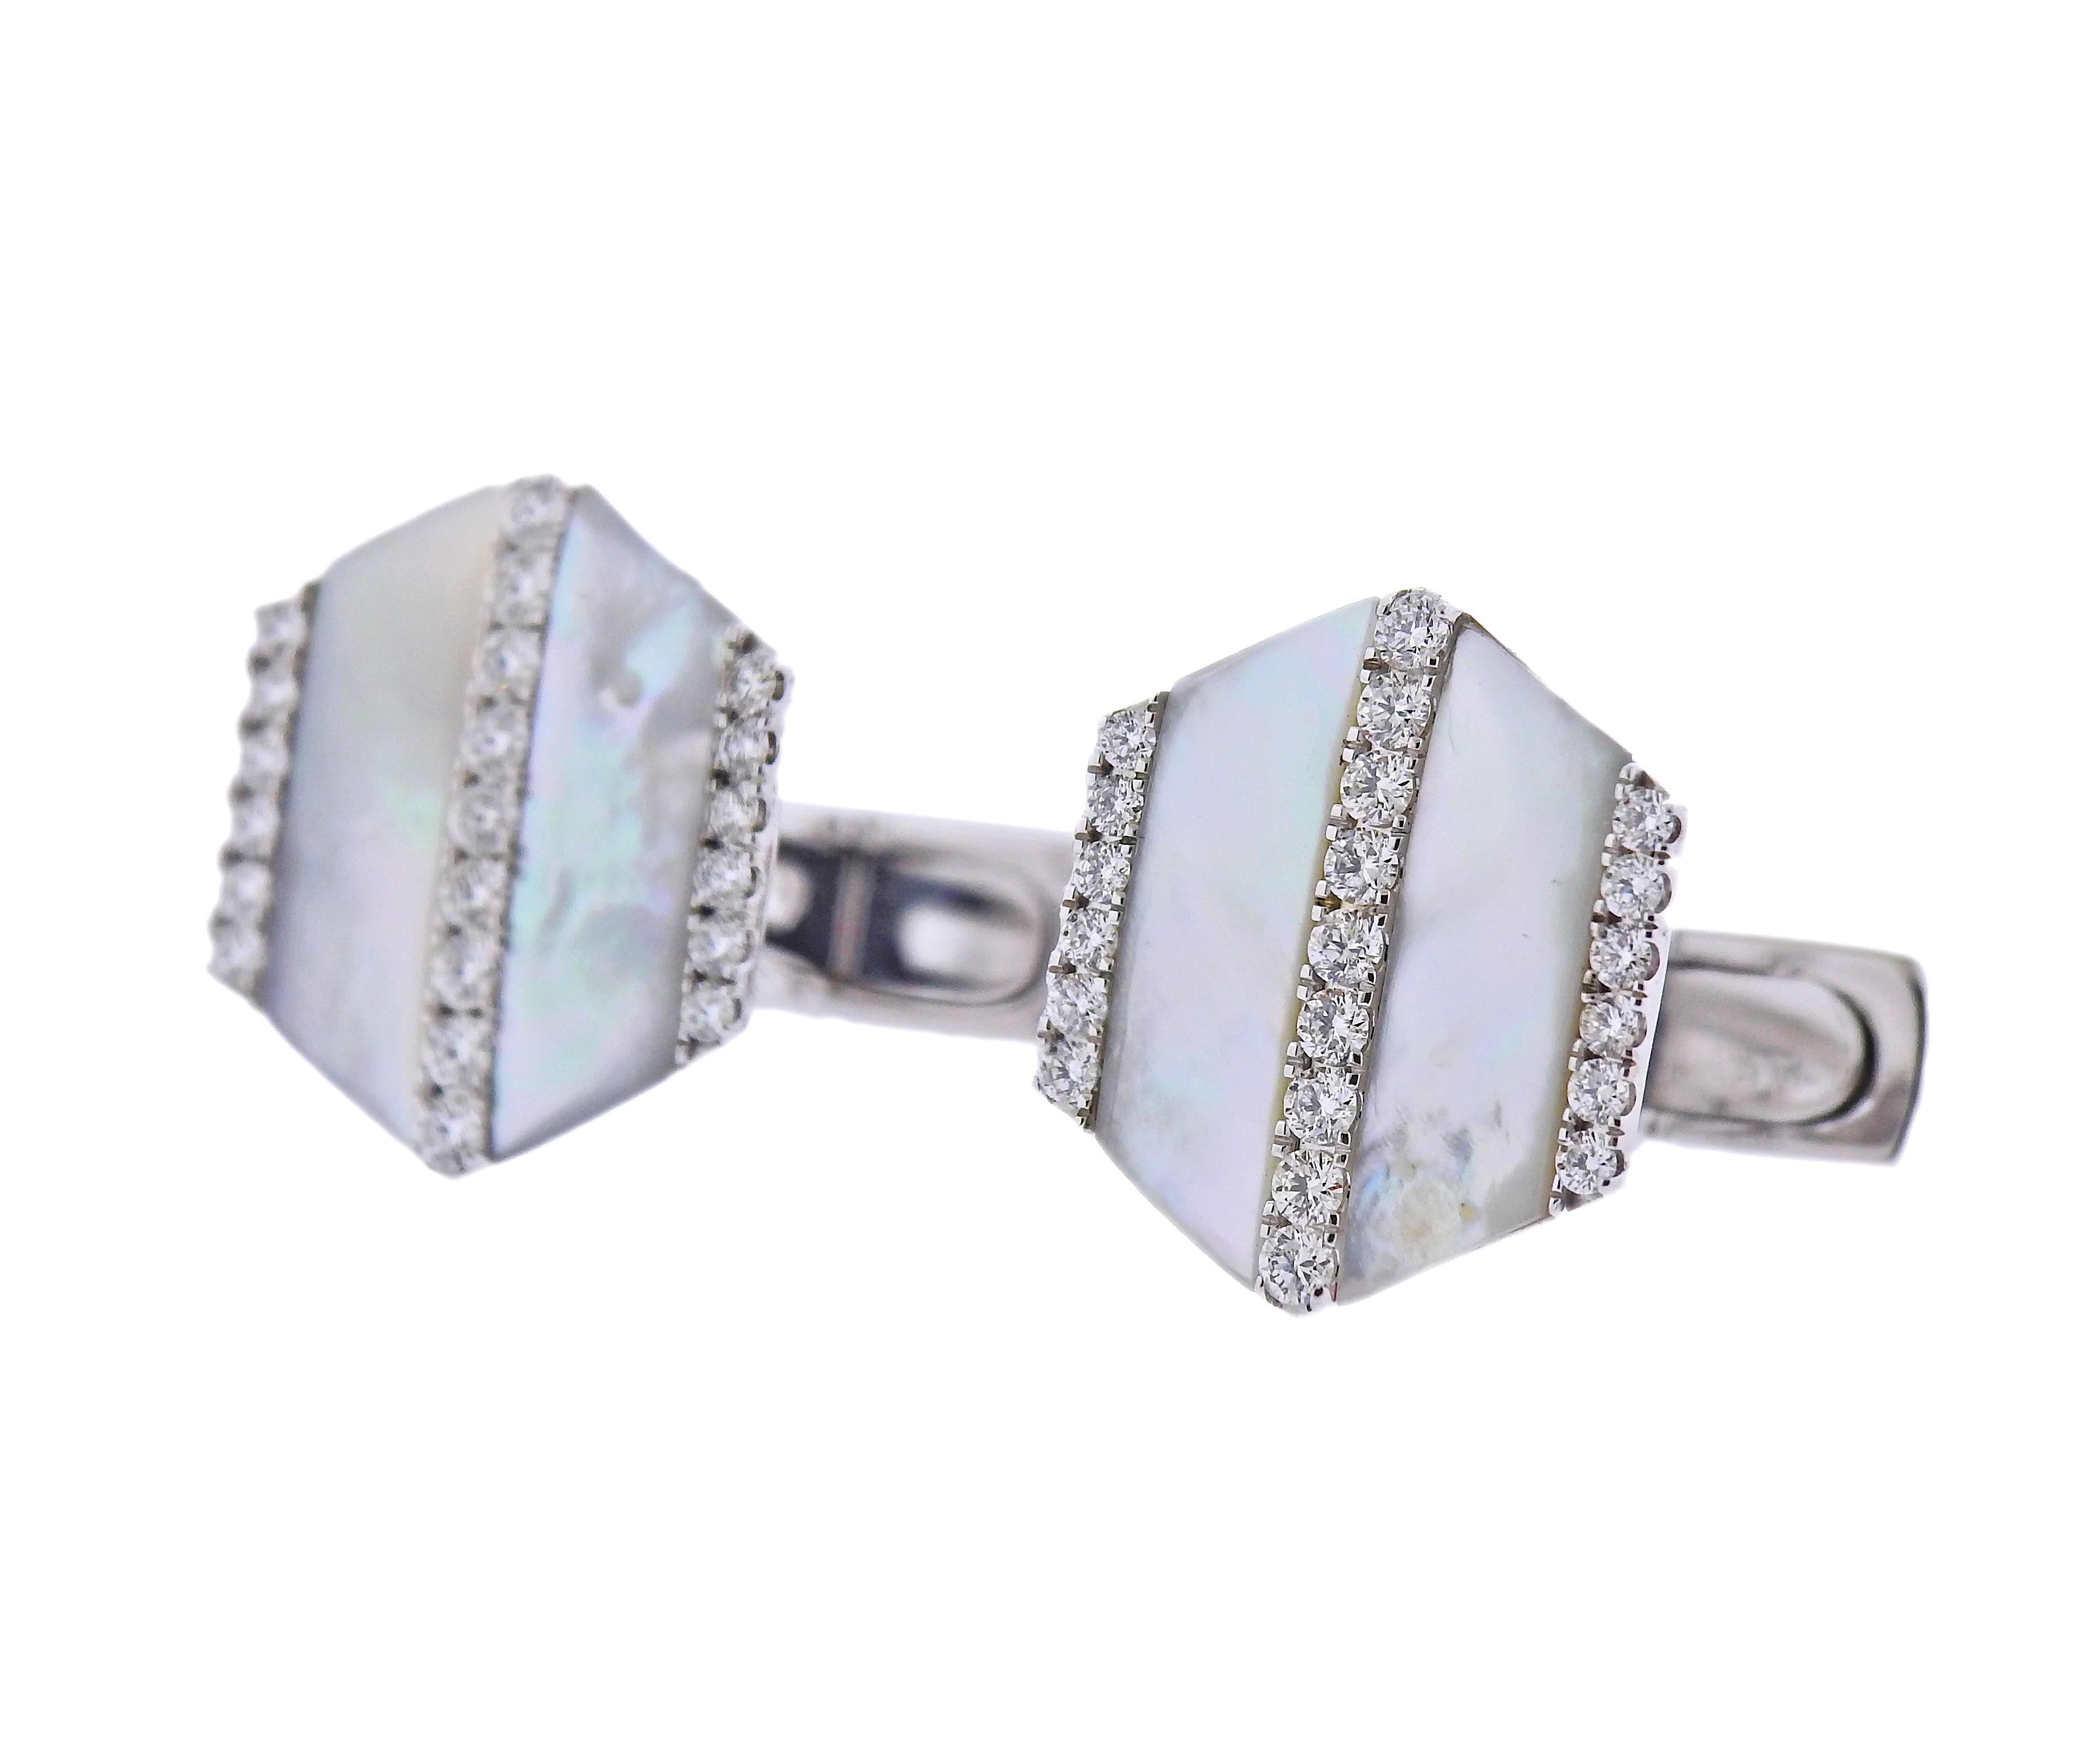 14k White Gold cufflinks. Set with 0.50ctw in SI F/G diamonds and Mother of Pearl. Cufflinks measure 17mm x 15mm. Marked - Eravos, 14k. Weight - 7.6 grams.
